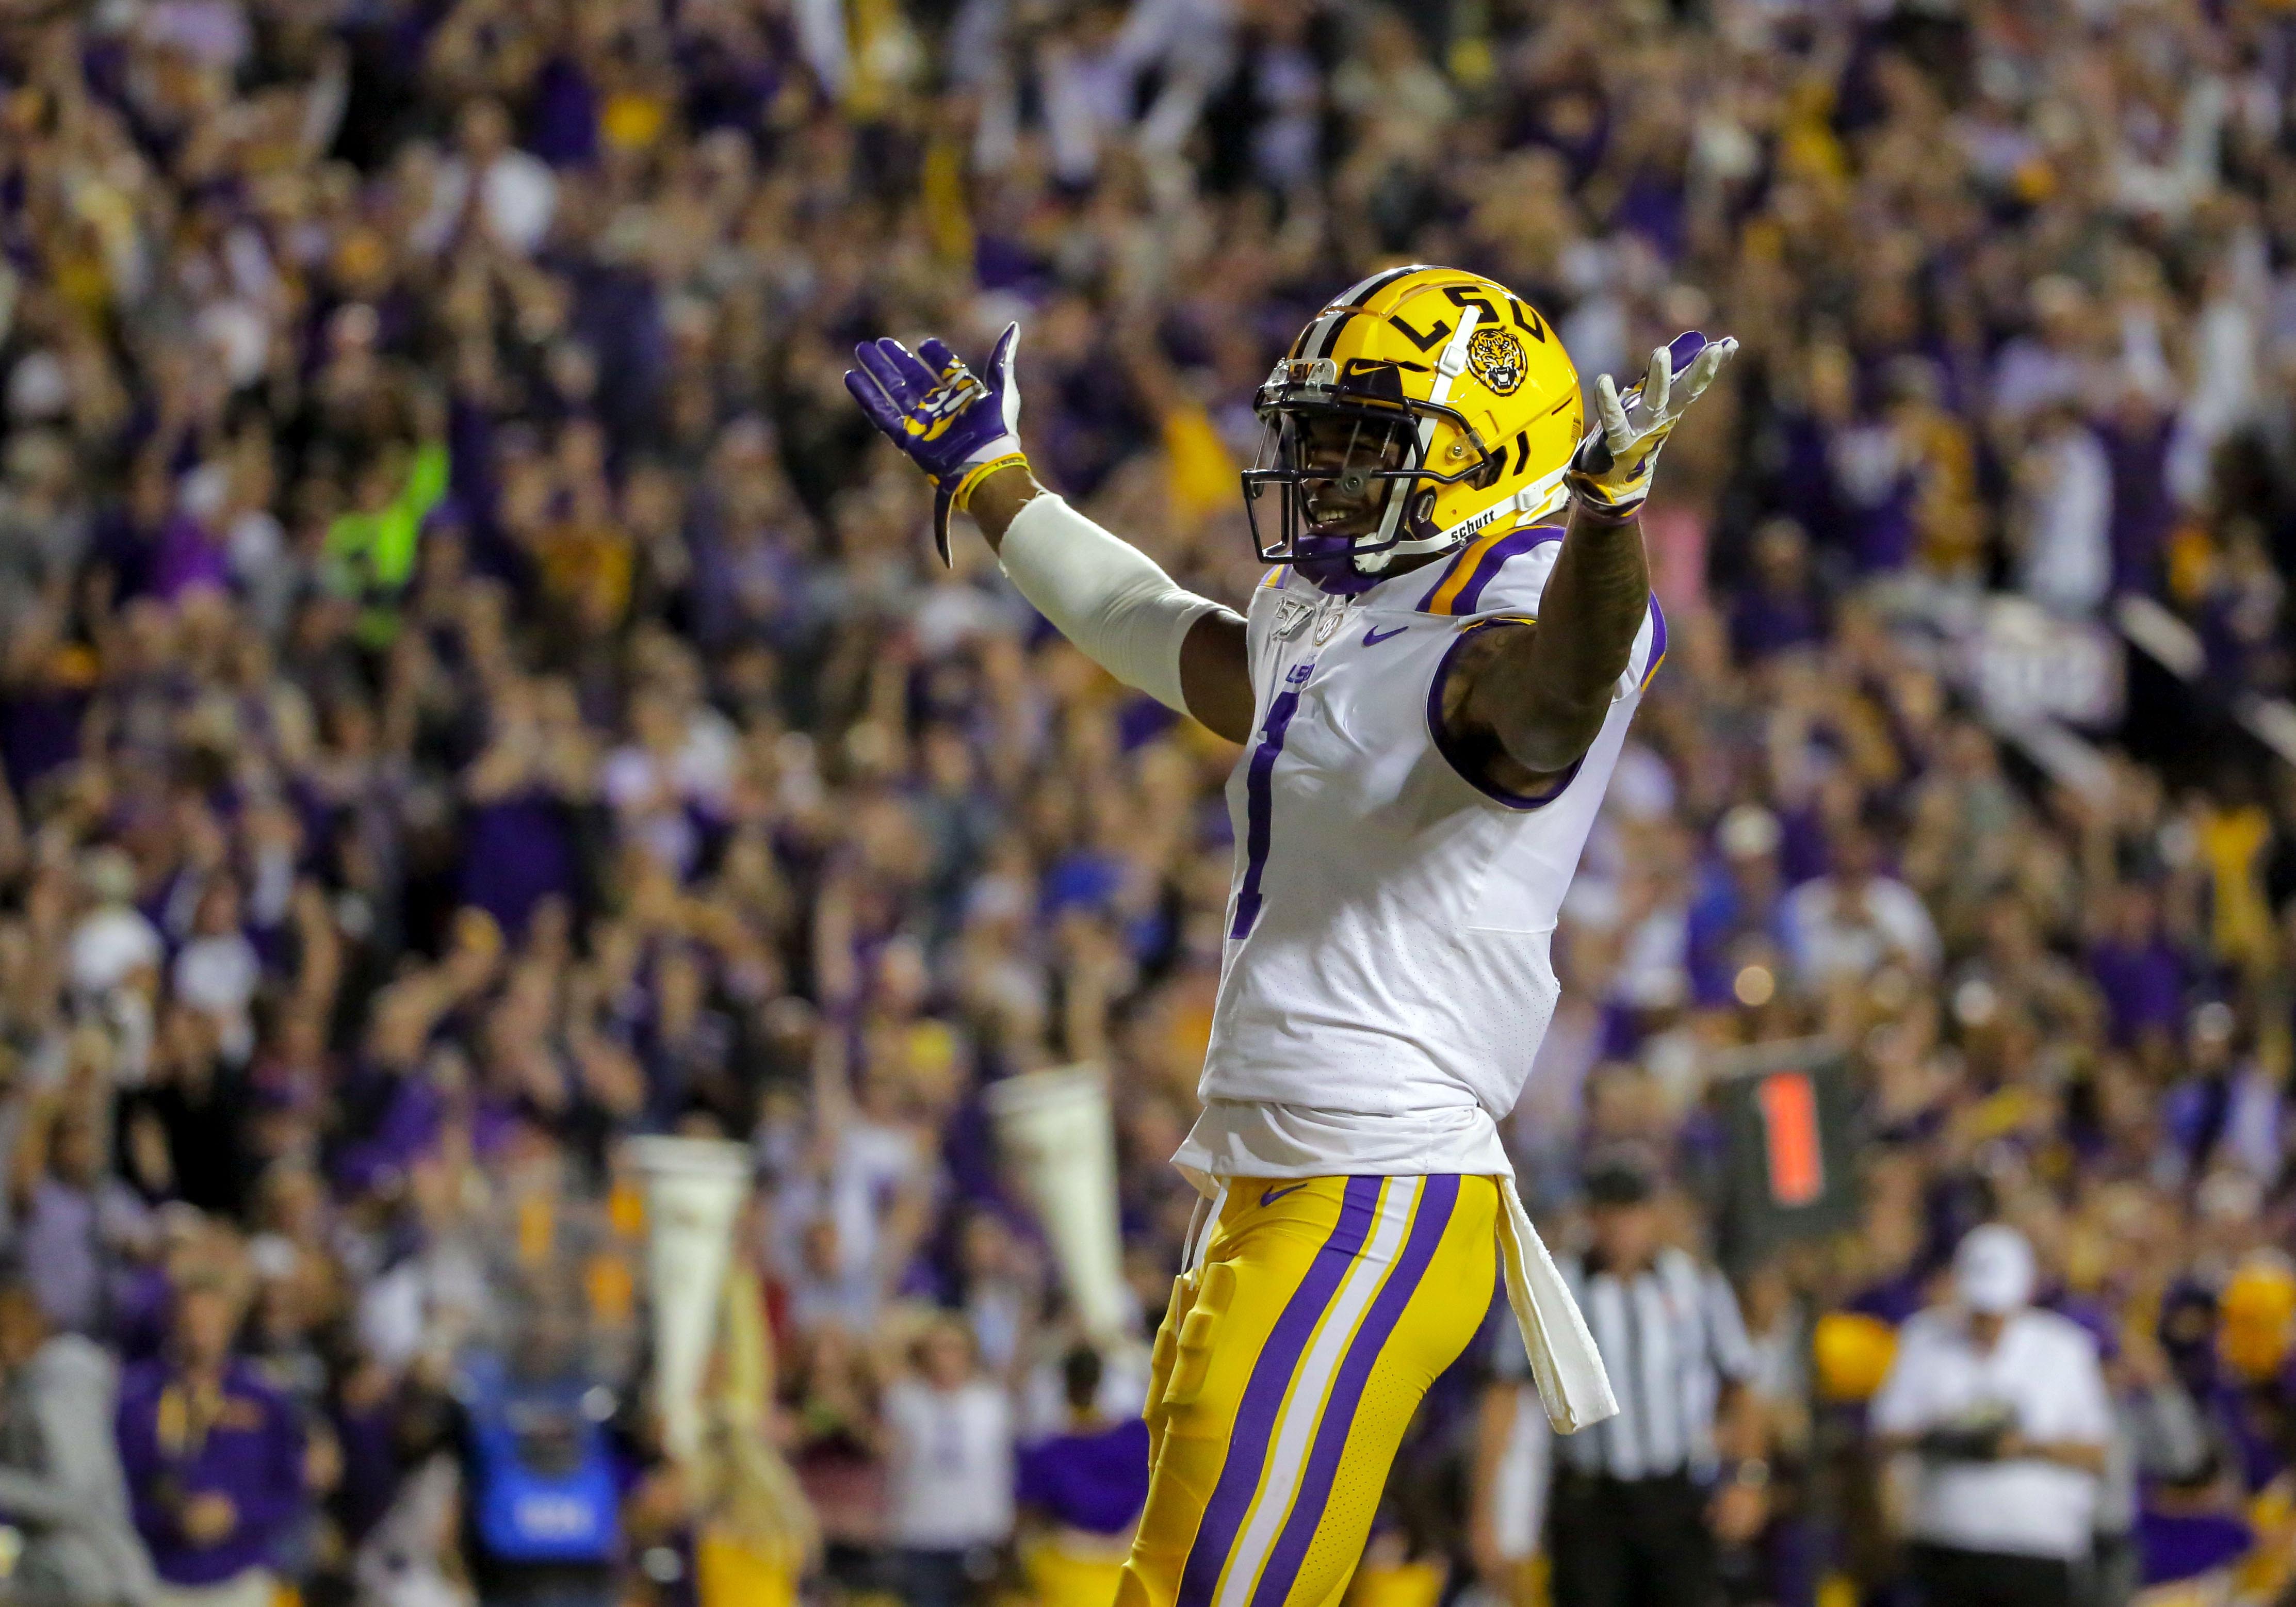 With SEC Marching Forward With 2020 Season, LSU Football Preparing to